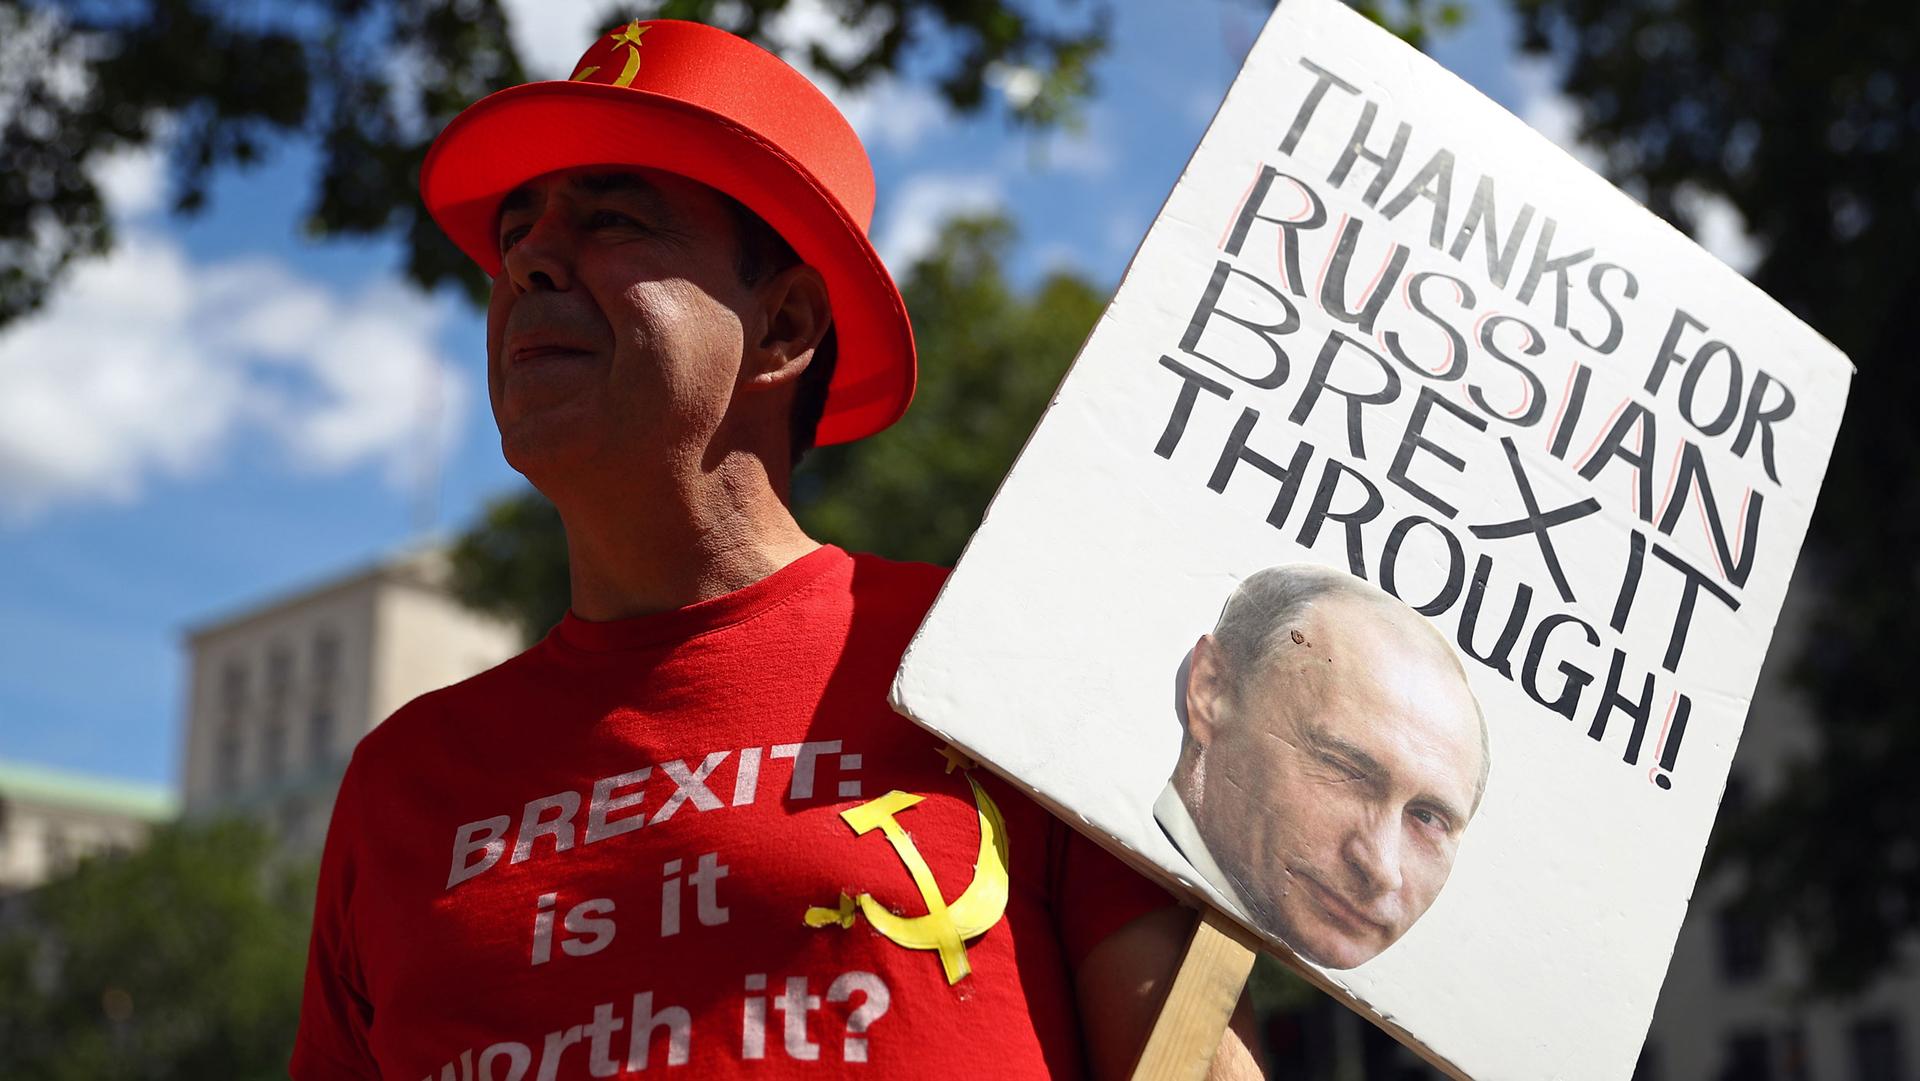 A man wearing a red top hat with the Russian hammer a sickle is shown holding a sign that says, "Thanks for the Russian Brexit through.